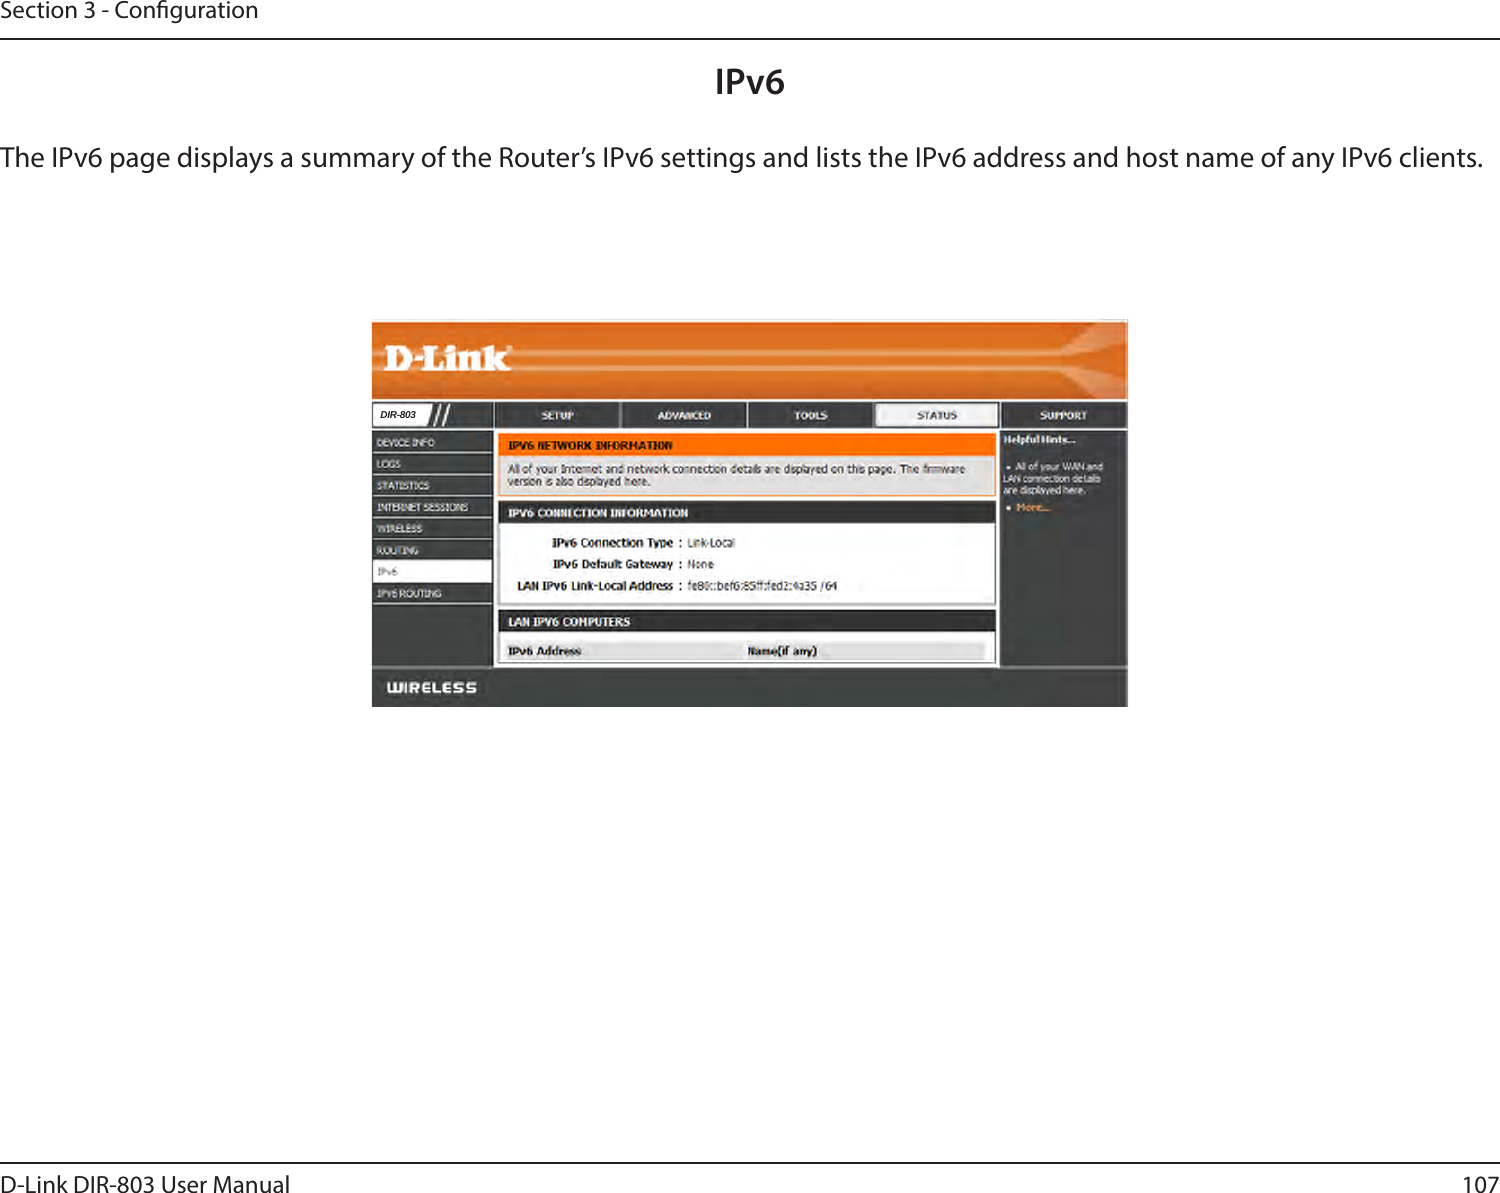 107D-Link DIR-803 User ManualSection 3 - CongurationIPv6The IPv6 page displays a summary of the Router’s IPv6 settings and lists the IPv6 address and host name of any IPv6 clients. DIR-803